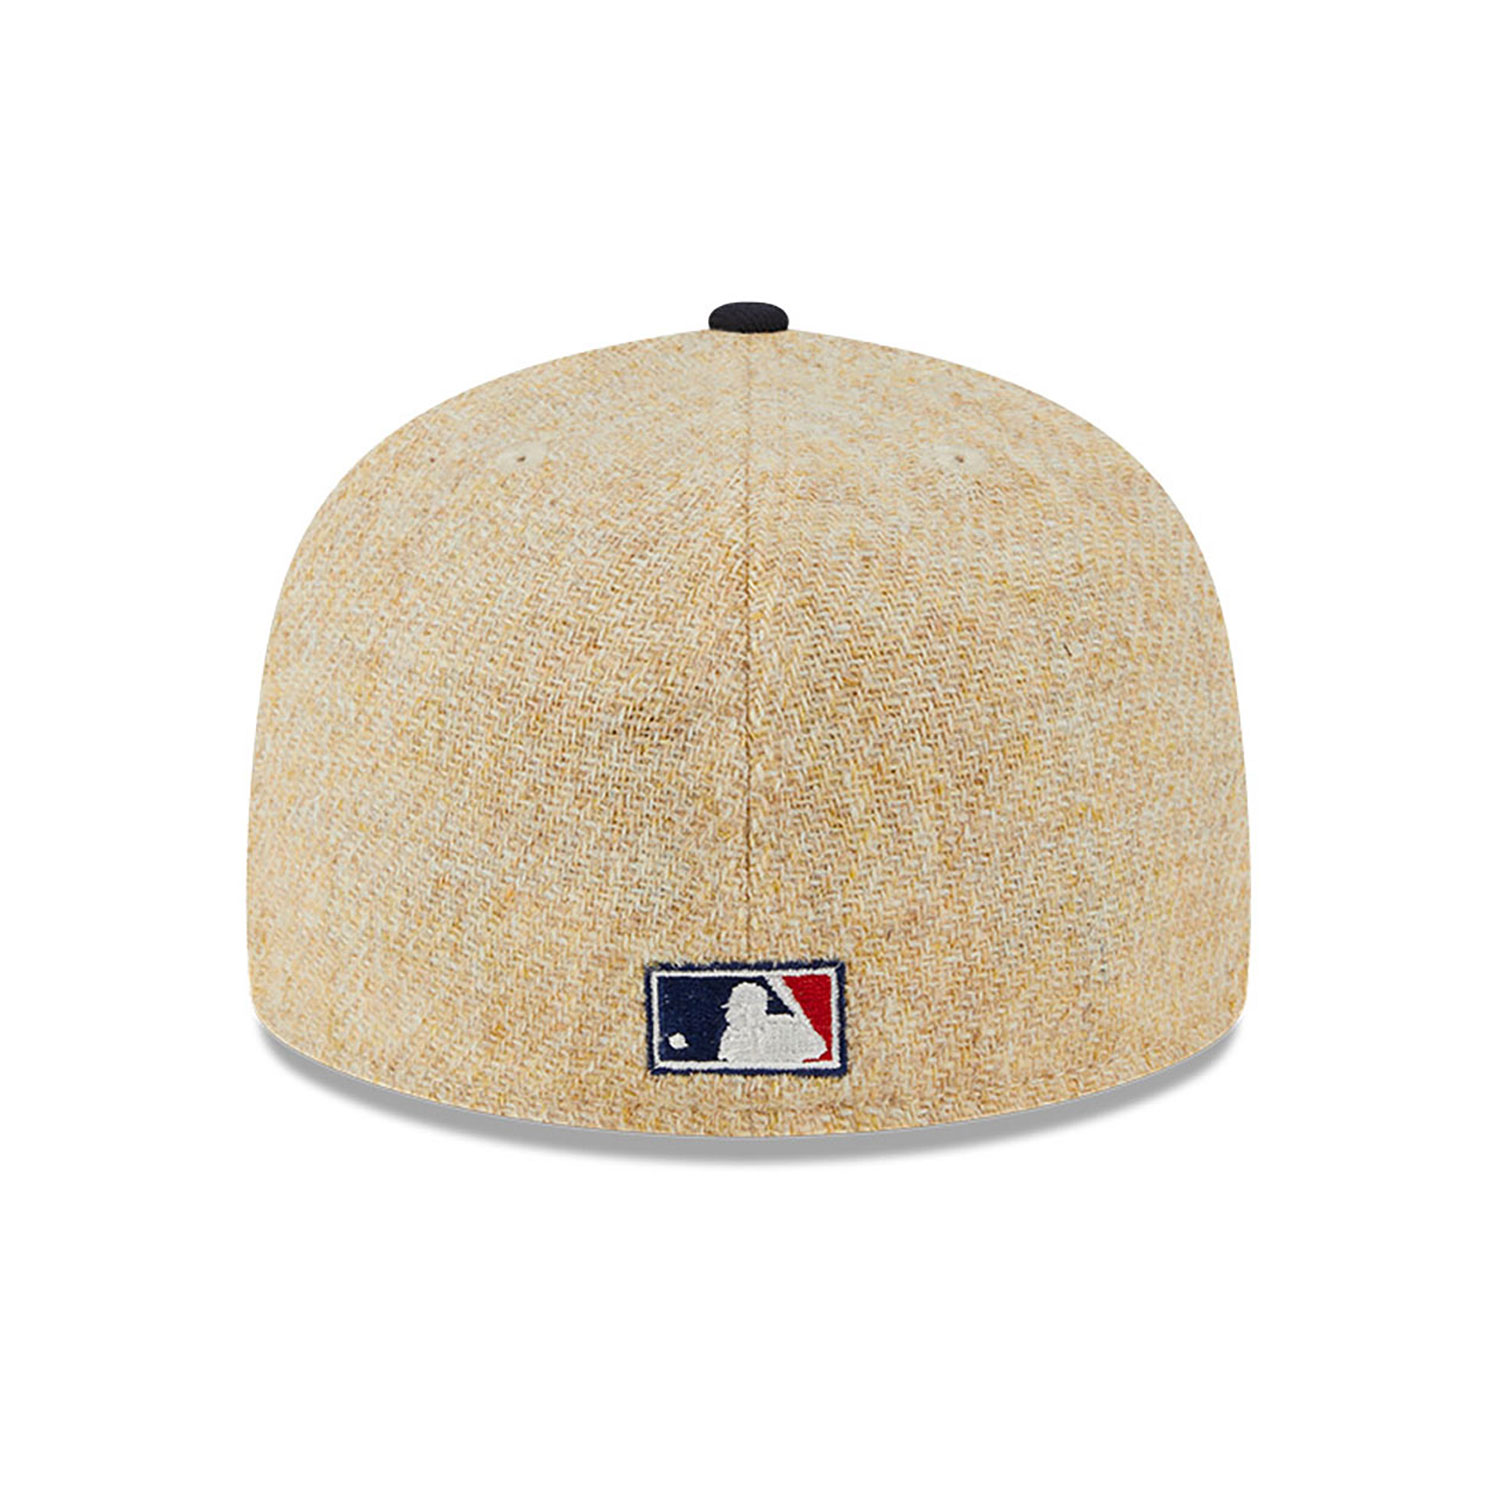 New Era Cleveland Indians Vegas Gold Two Tone Edition 59Fifty Fitted Hat, EXCLUSIVE HATS, CAPS